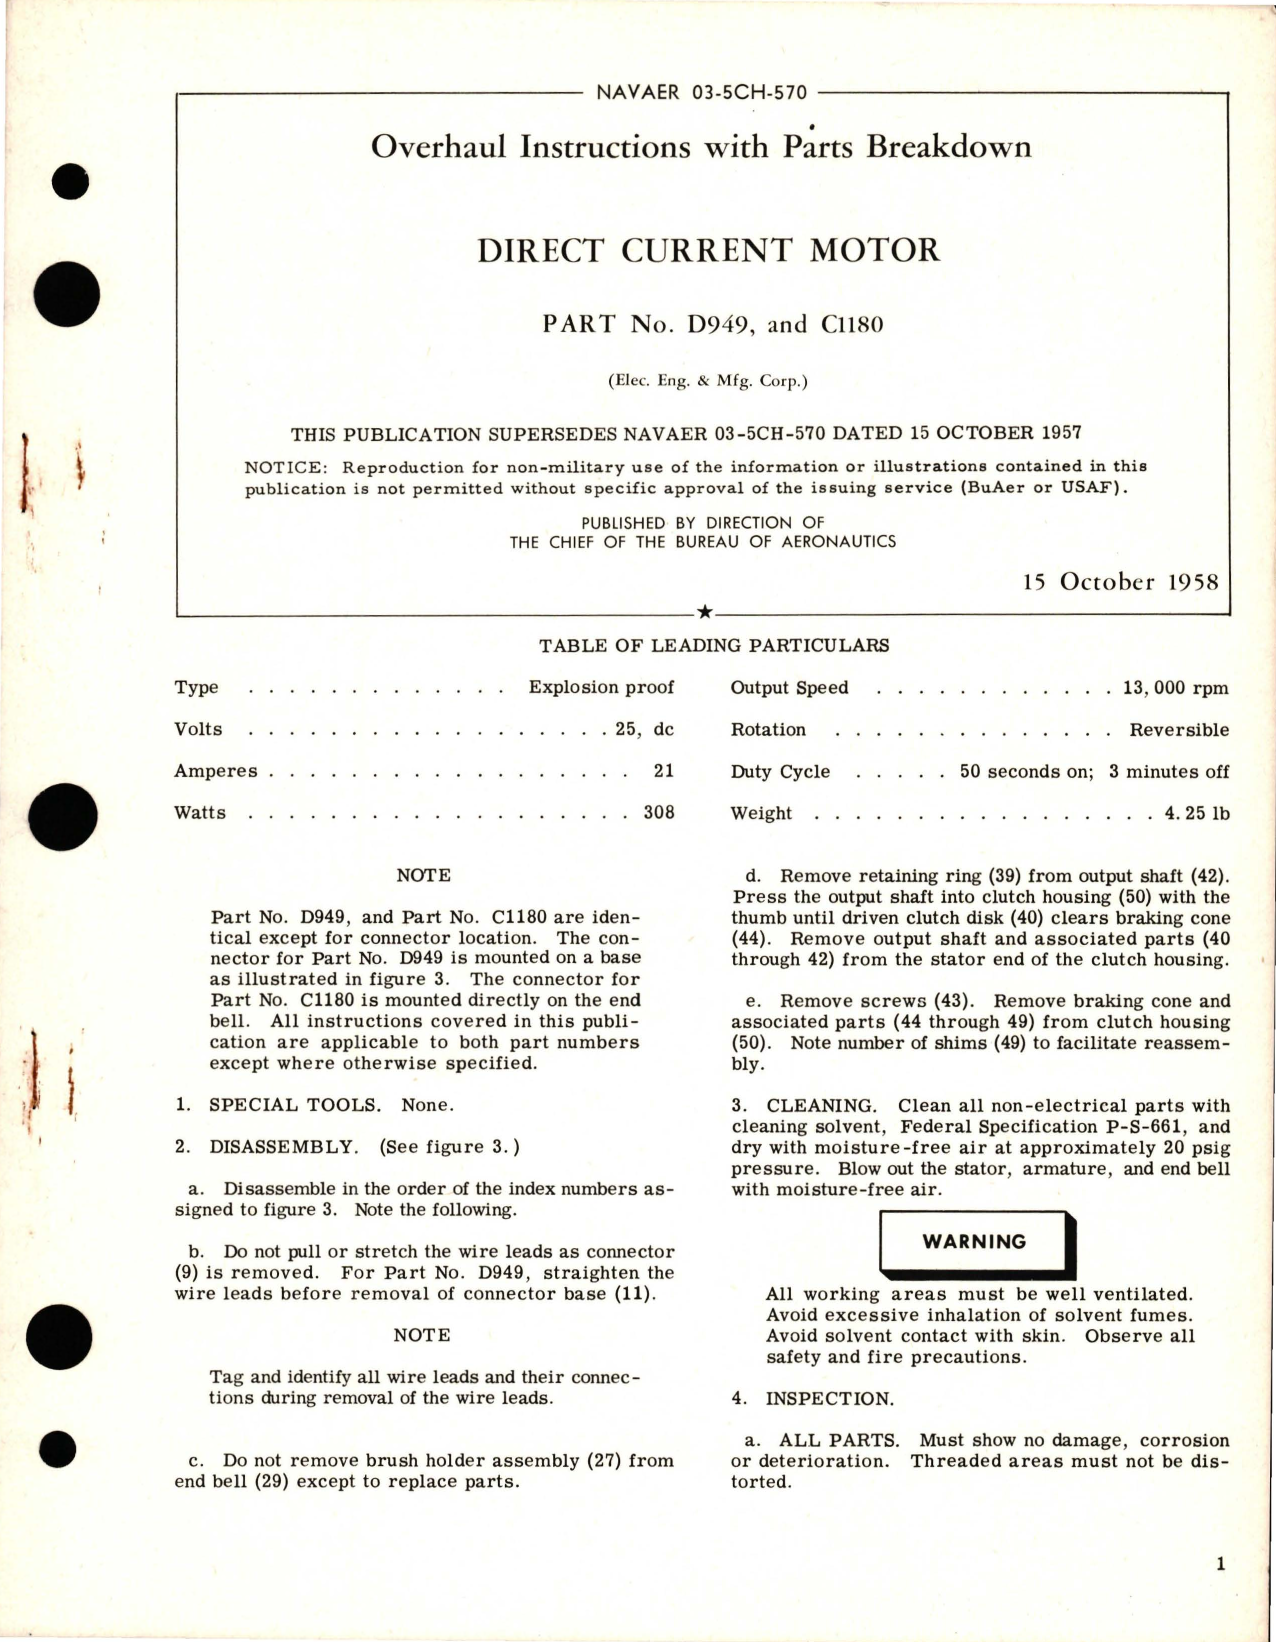 Sample page 1 from AirCorps Library document: Overhaul Instructions with Parts for Direct Current Motor - Part D949, C1180 